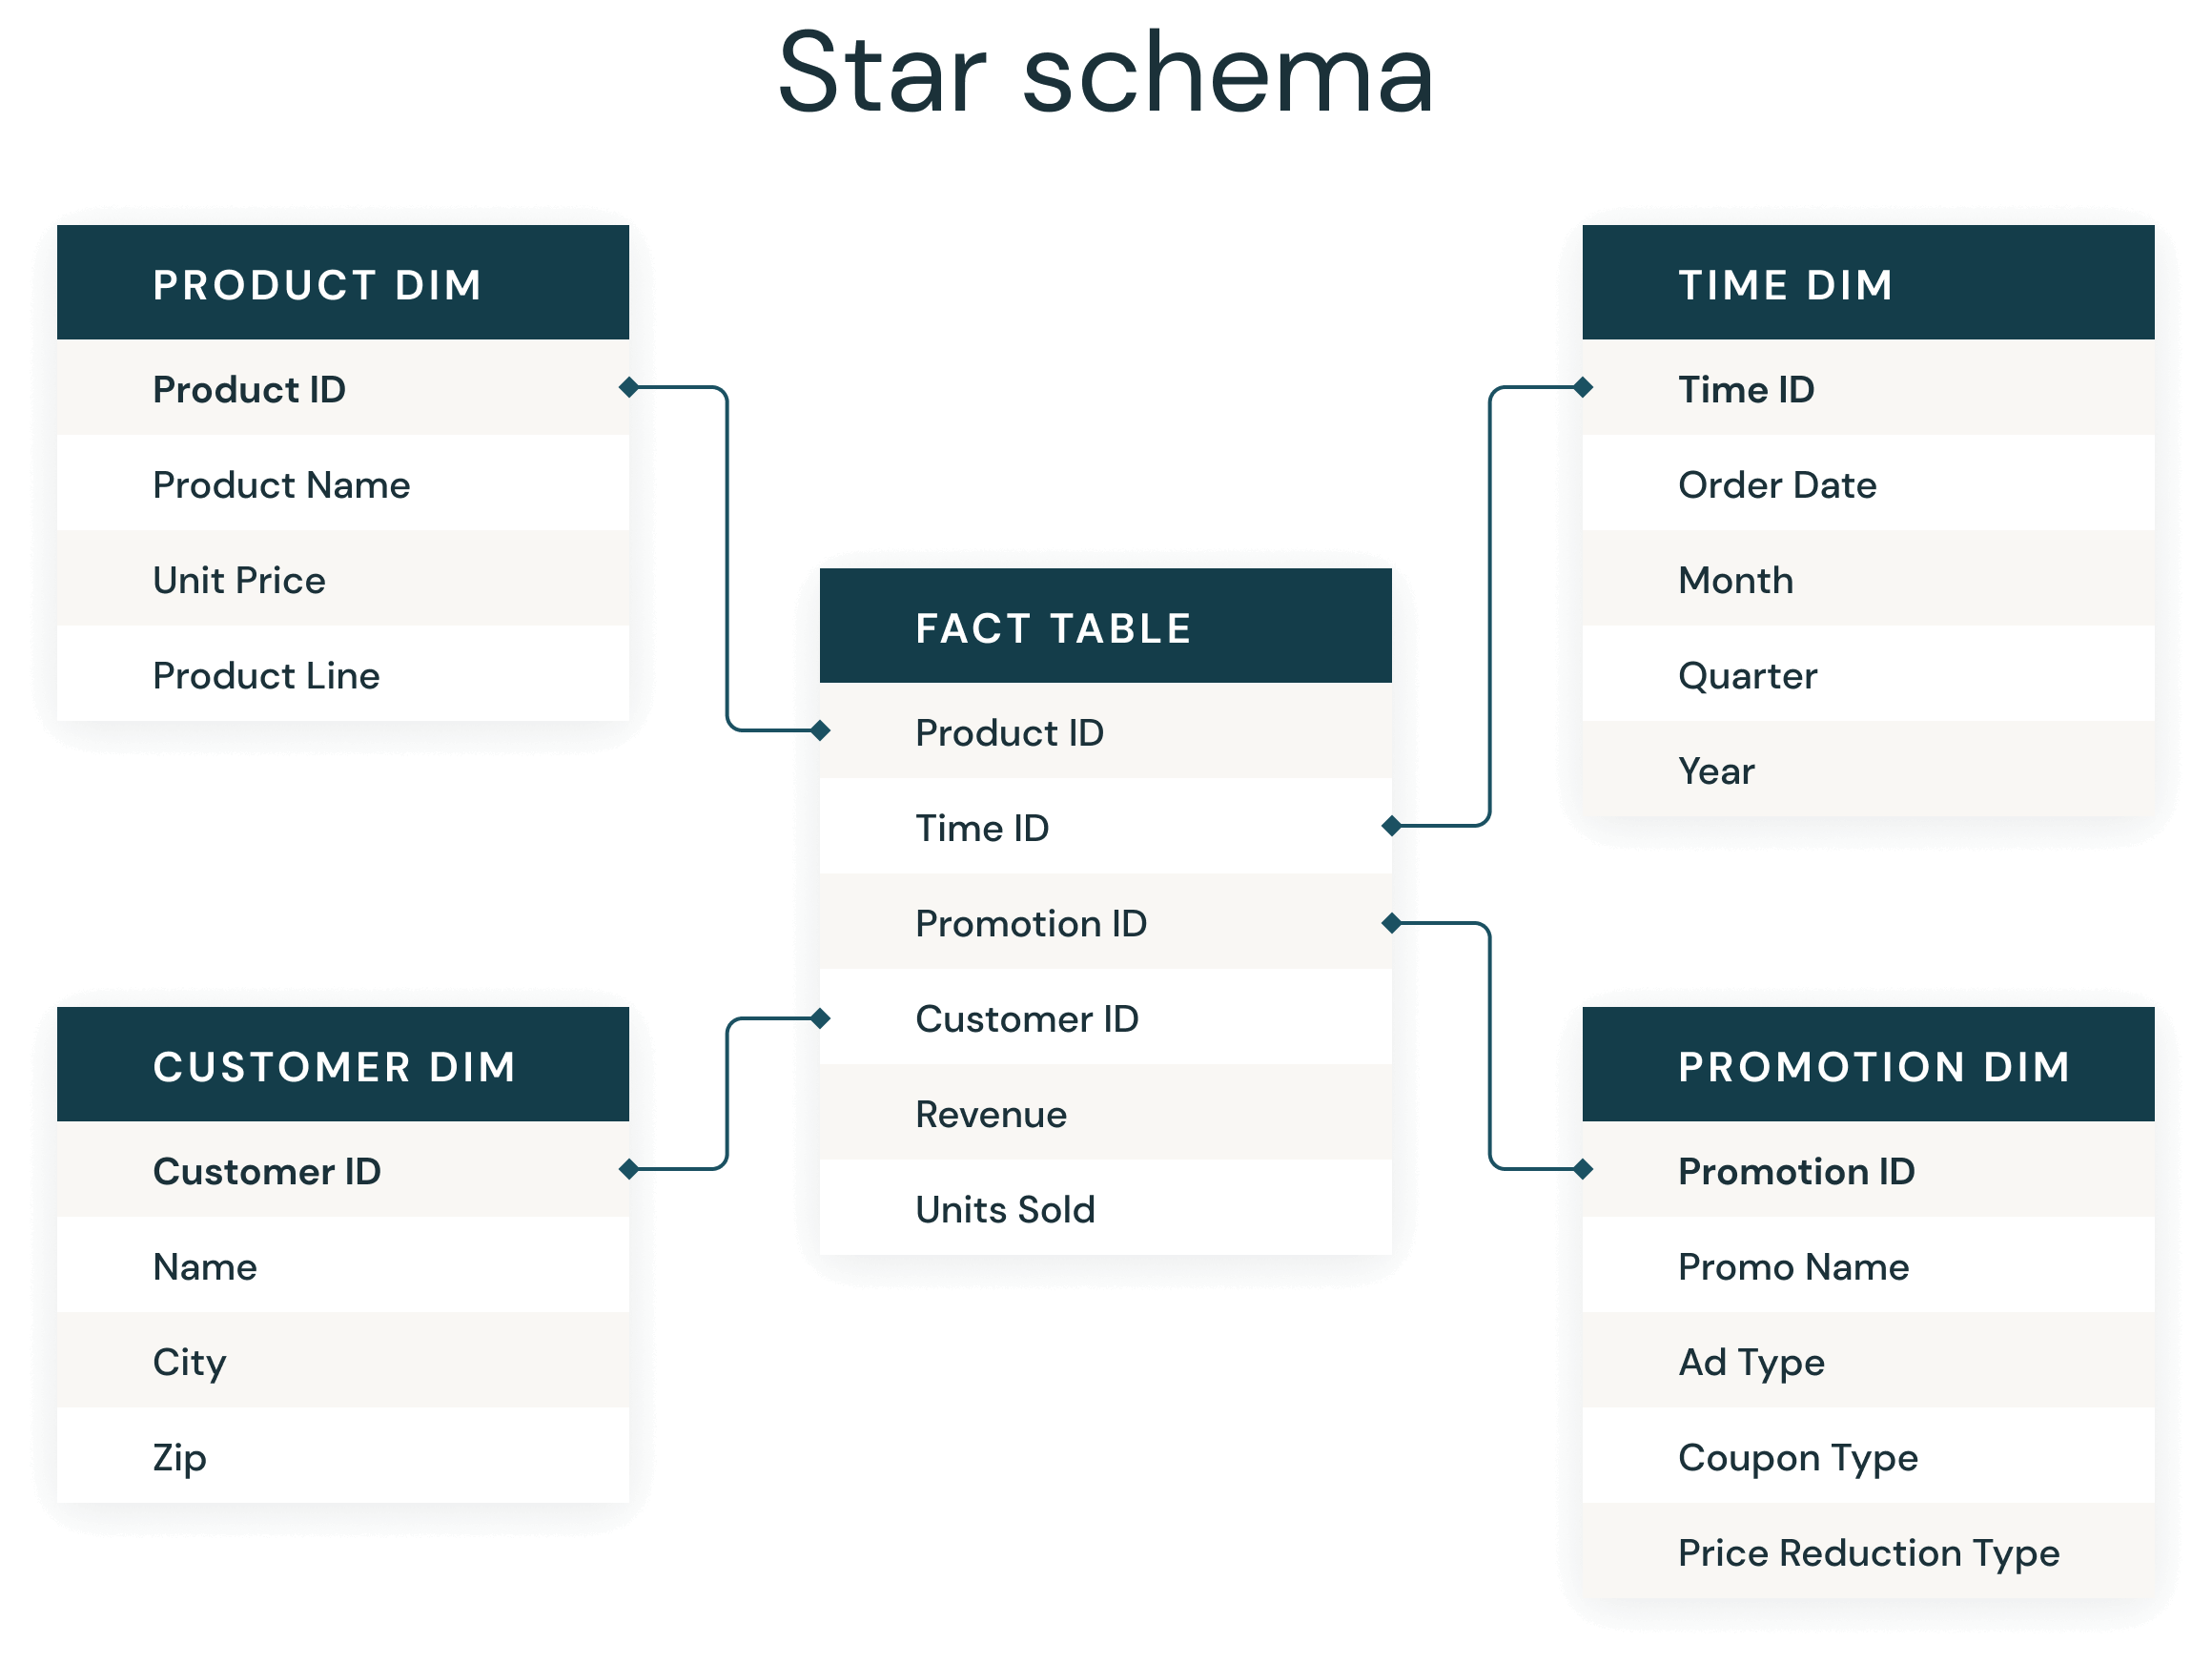 A sample star schema enterprise relationship diagram showing a single fact table connected to multiple dimension tables.